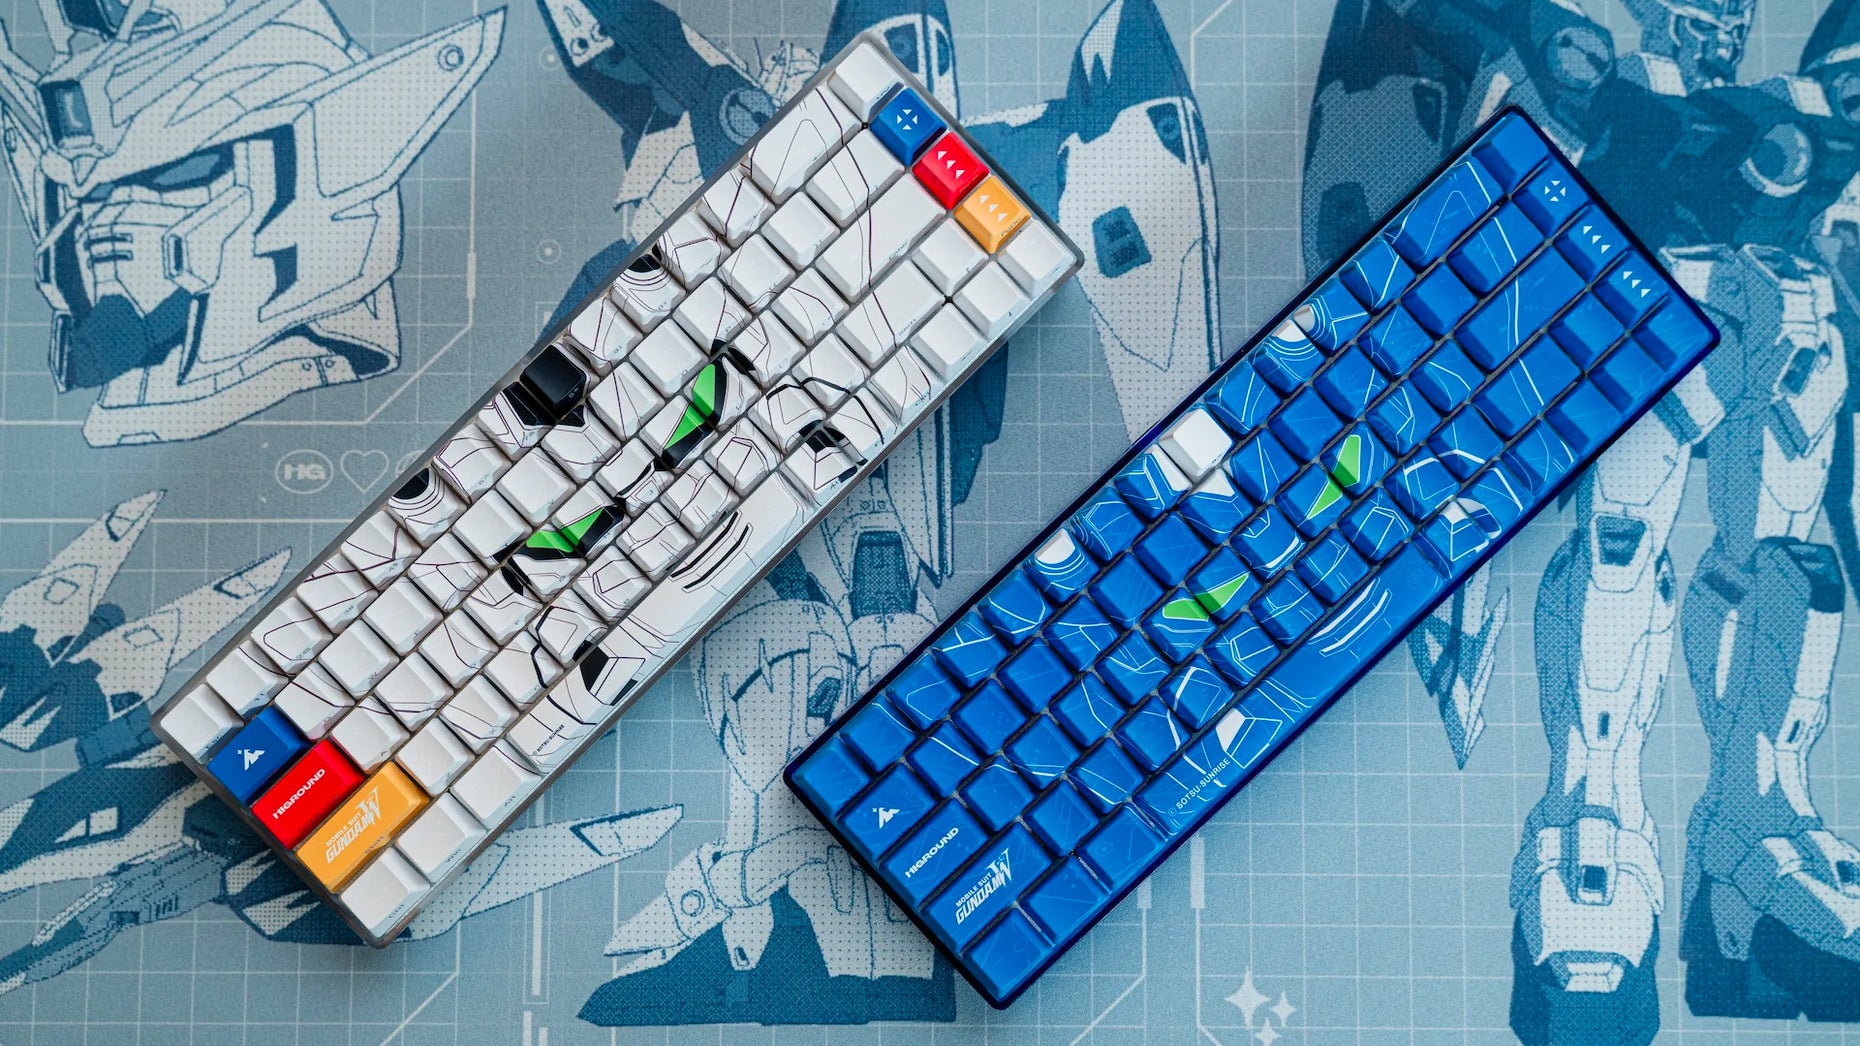 You Won’t Need Nippers, Glue, or Paint to Customise These Gundam Wing Keyboards